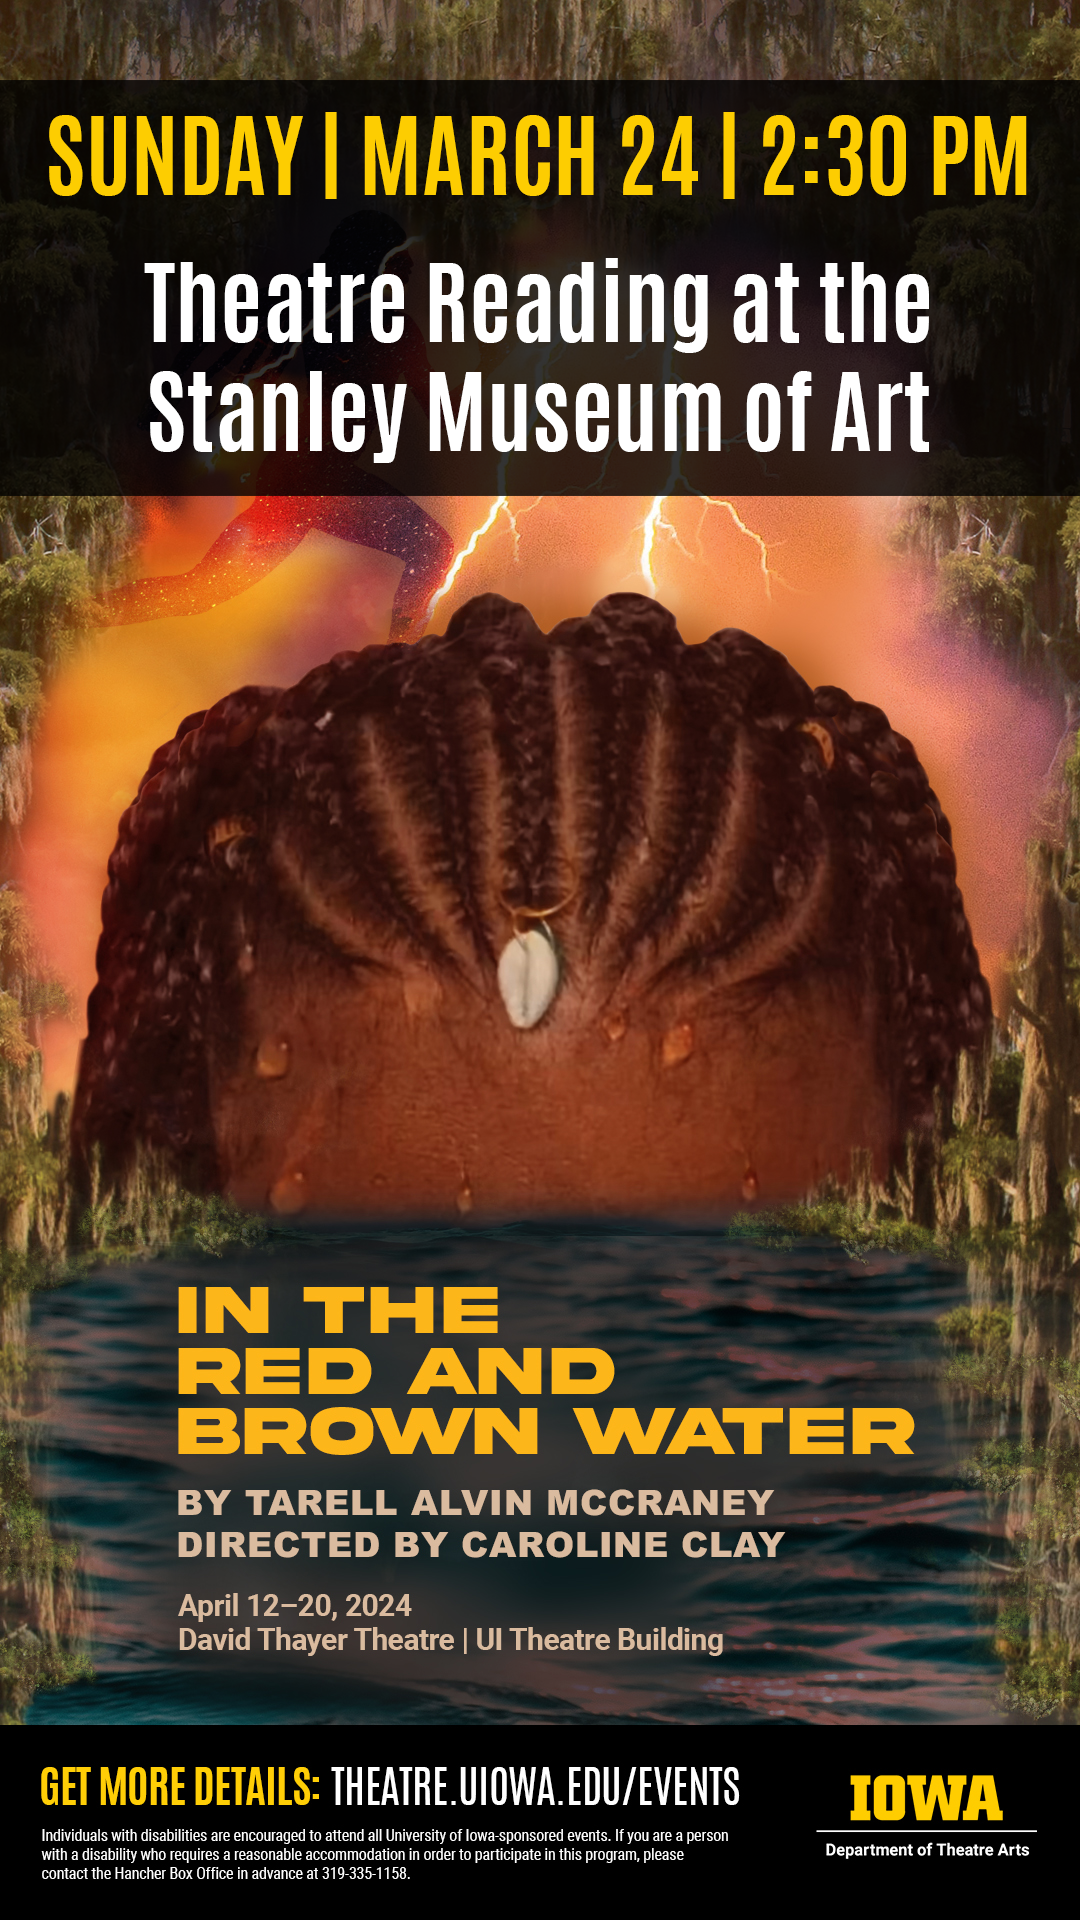 In the Red and Brown Water reading